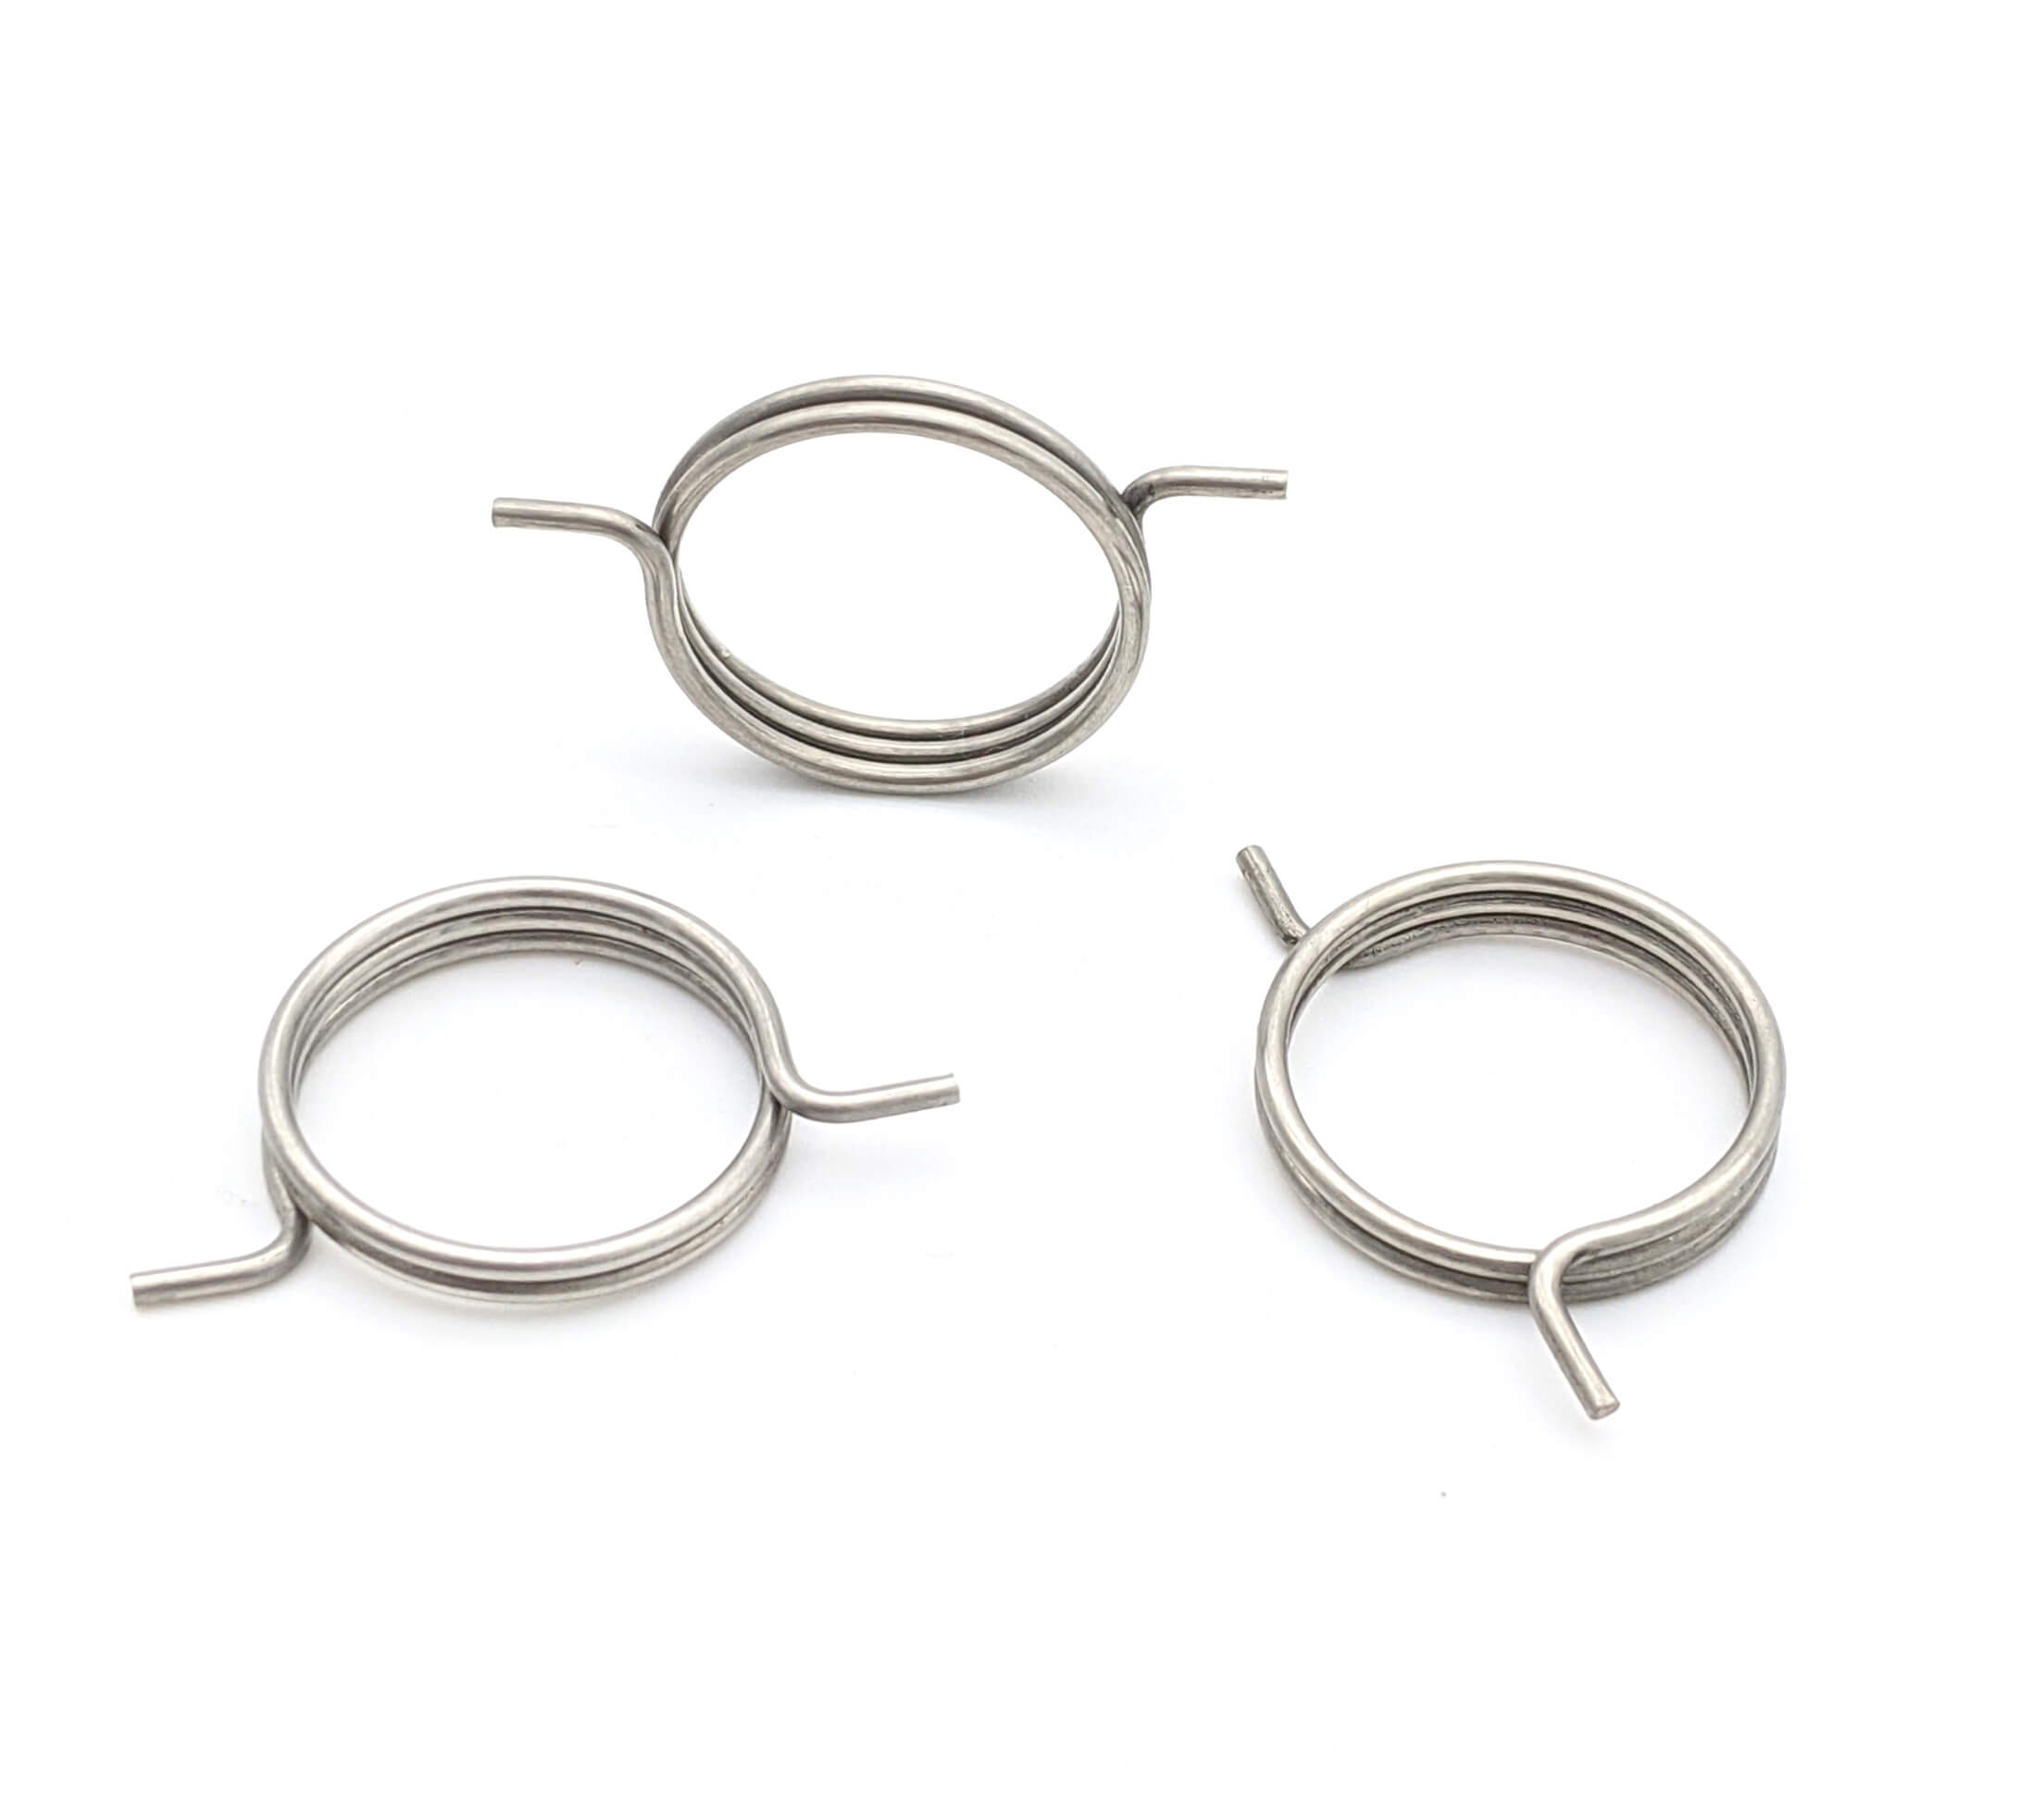 Stainless steel torsion spring